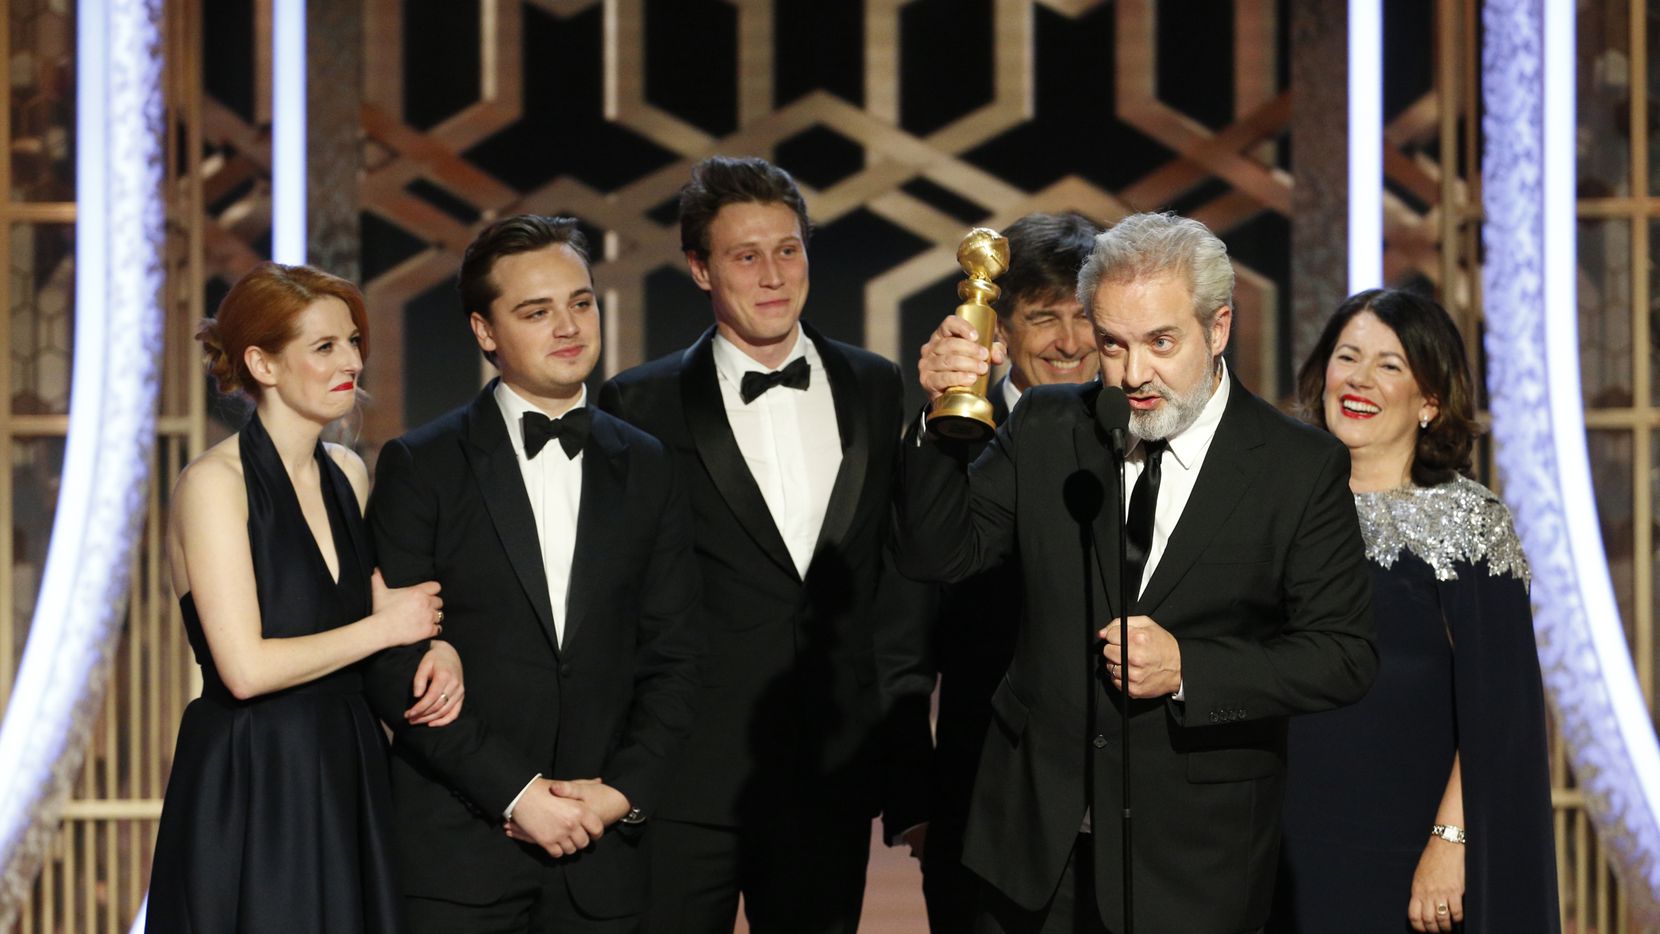 1917 Once Upon A Time In Hollywood Win Golden Globes